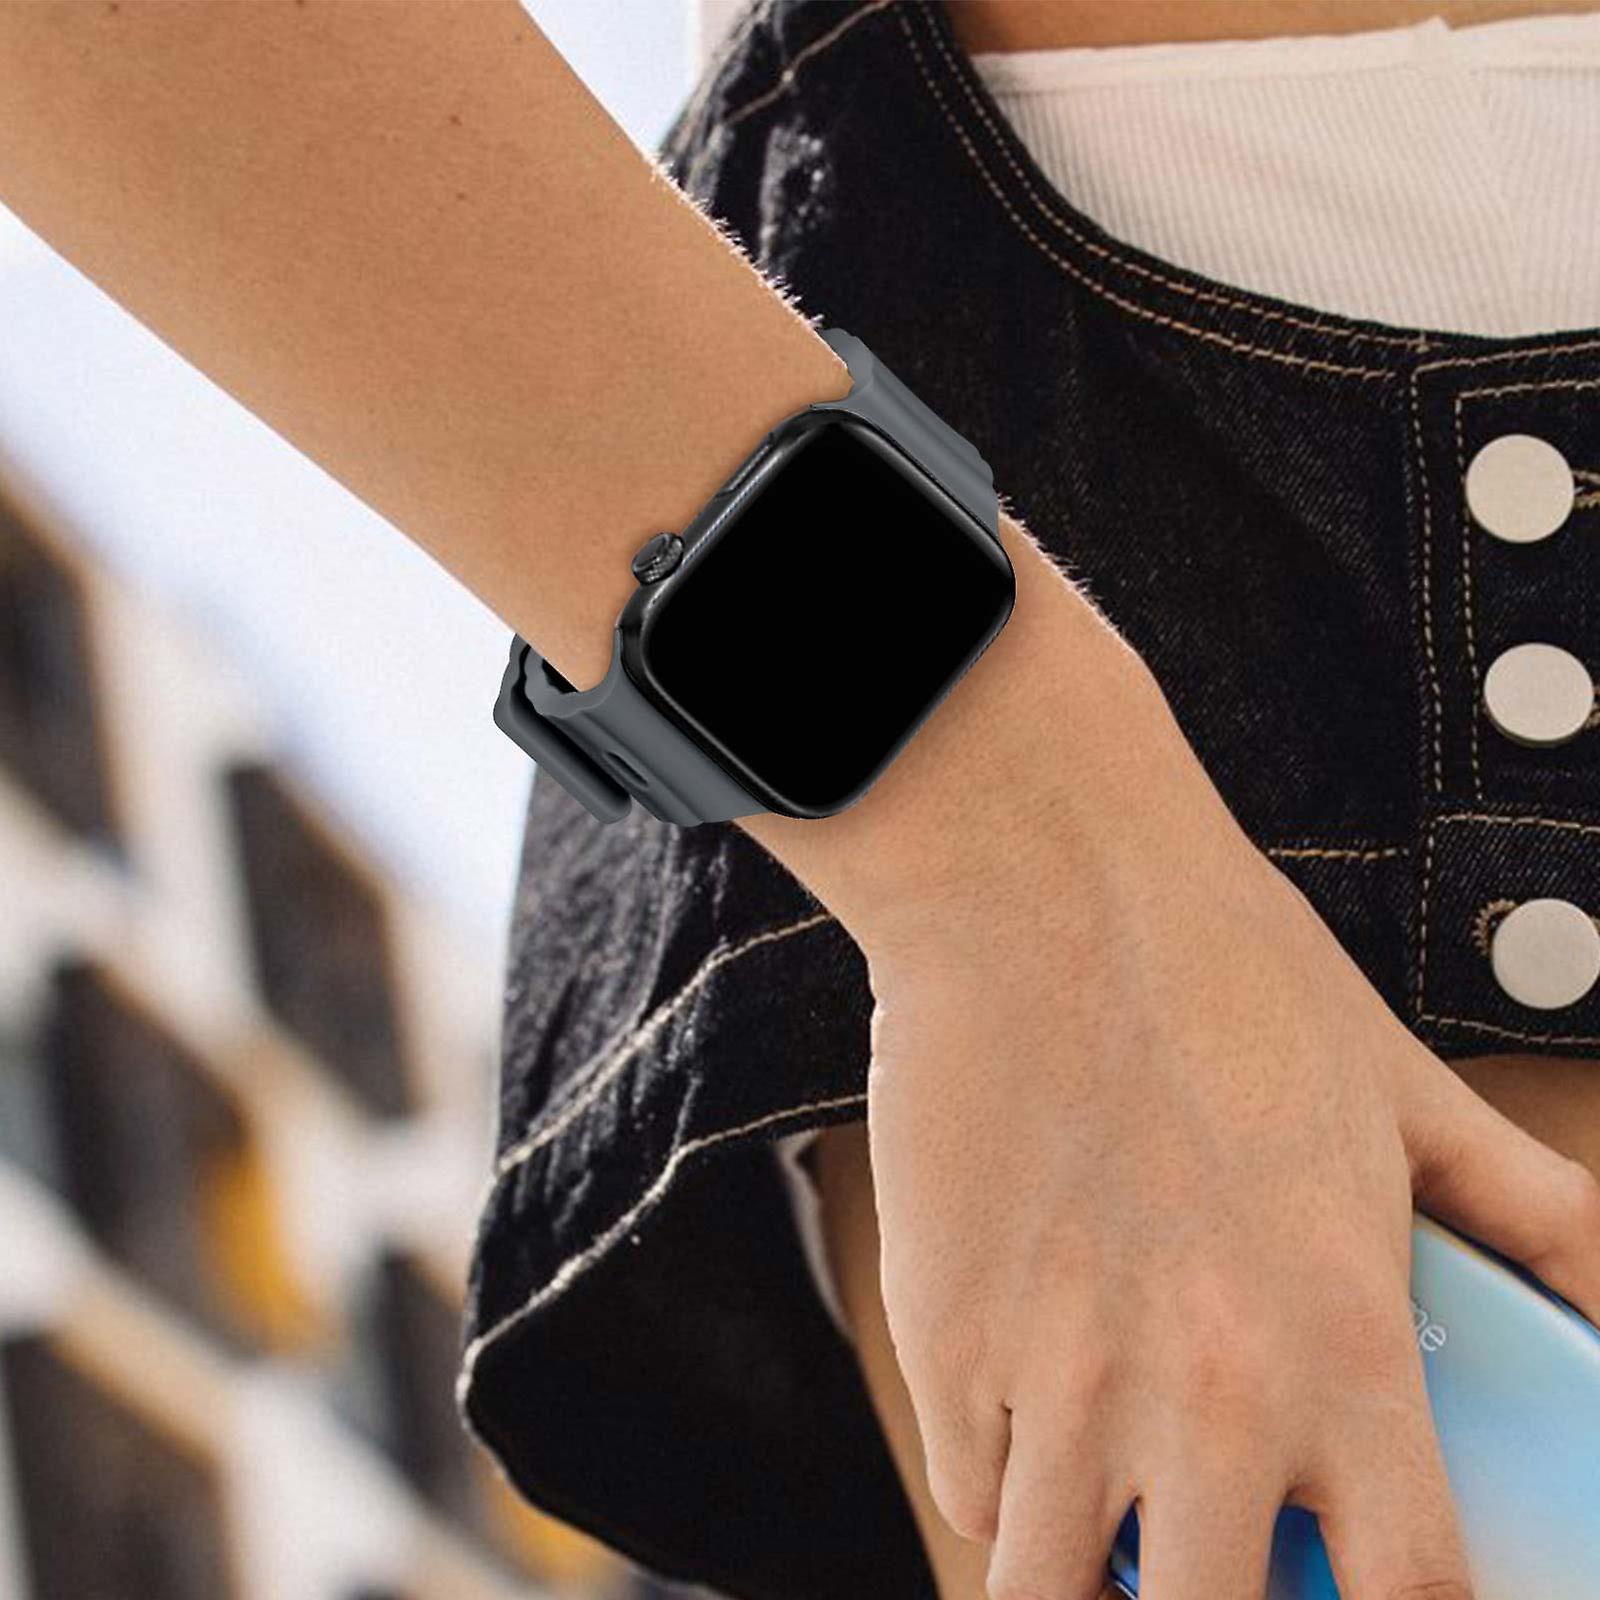 Buckle Soft Silicone Band For Apple Watch